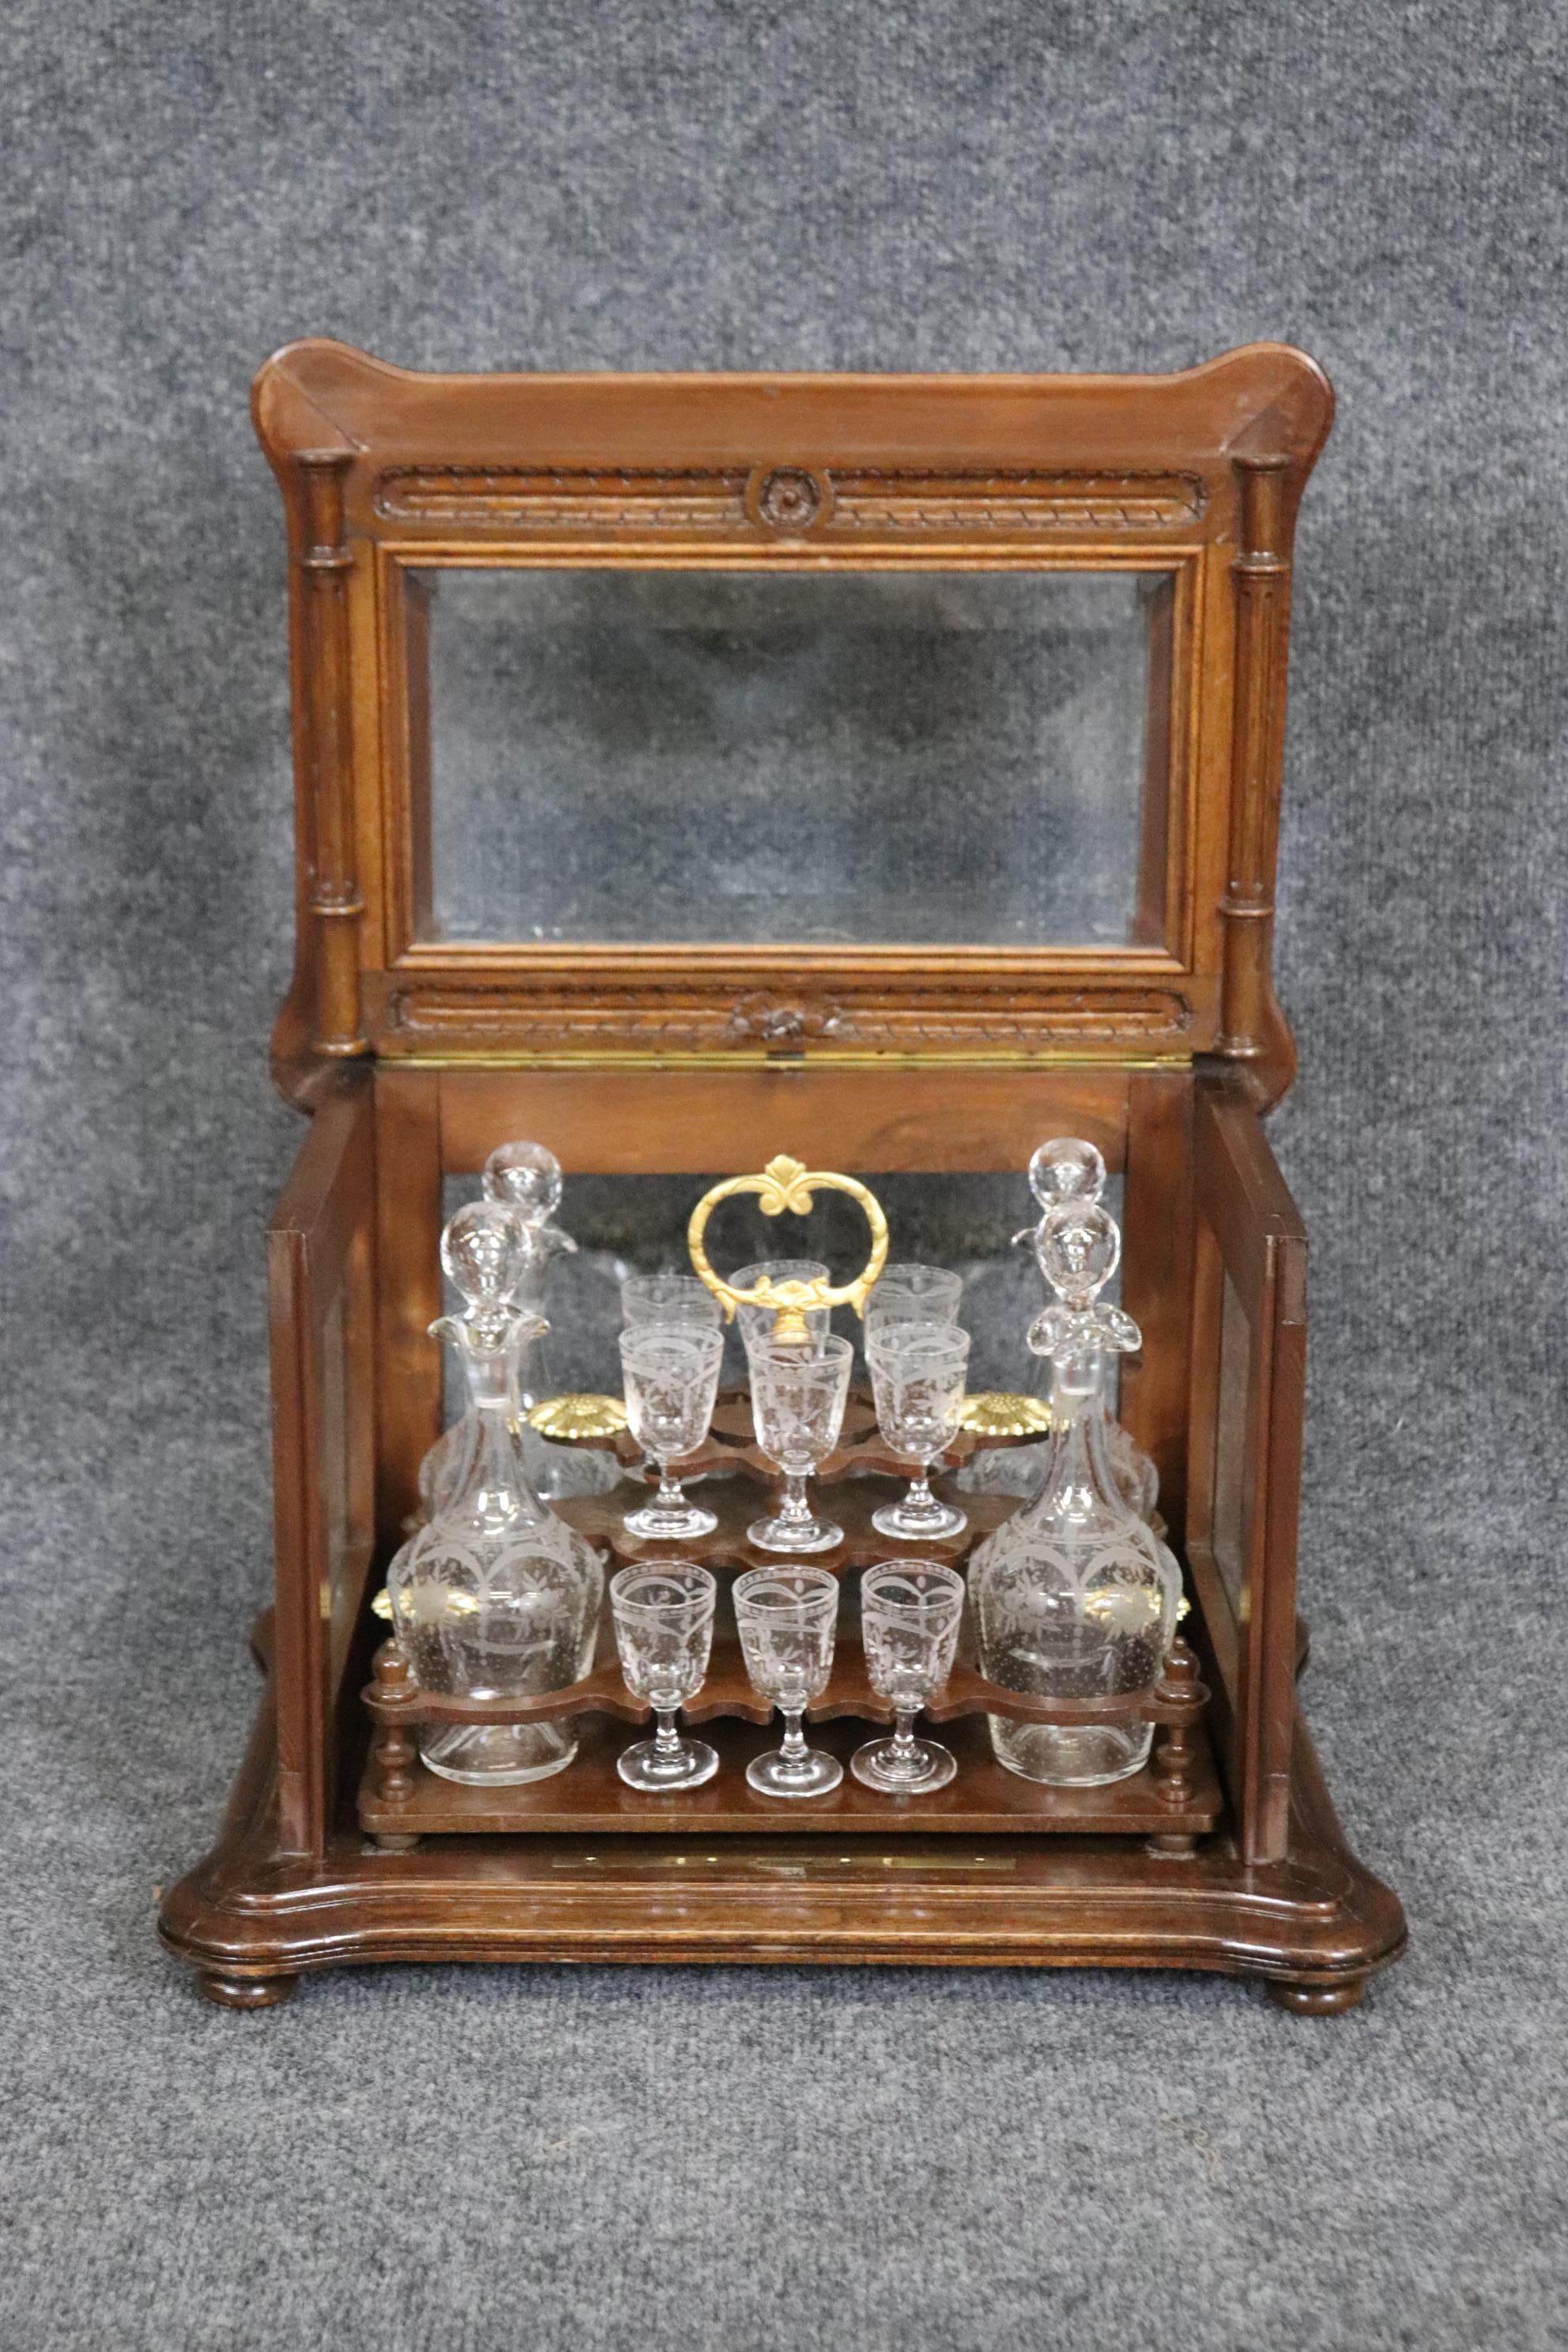 This is a superb tantalus with its original etched glass cordial glasses and etched glass decanters for whiskey or bourbon. The set is in very good original condition with entirely original finish in good condition and bright brass details inside.